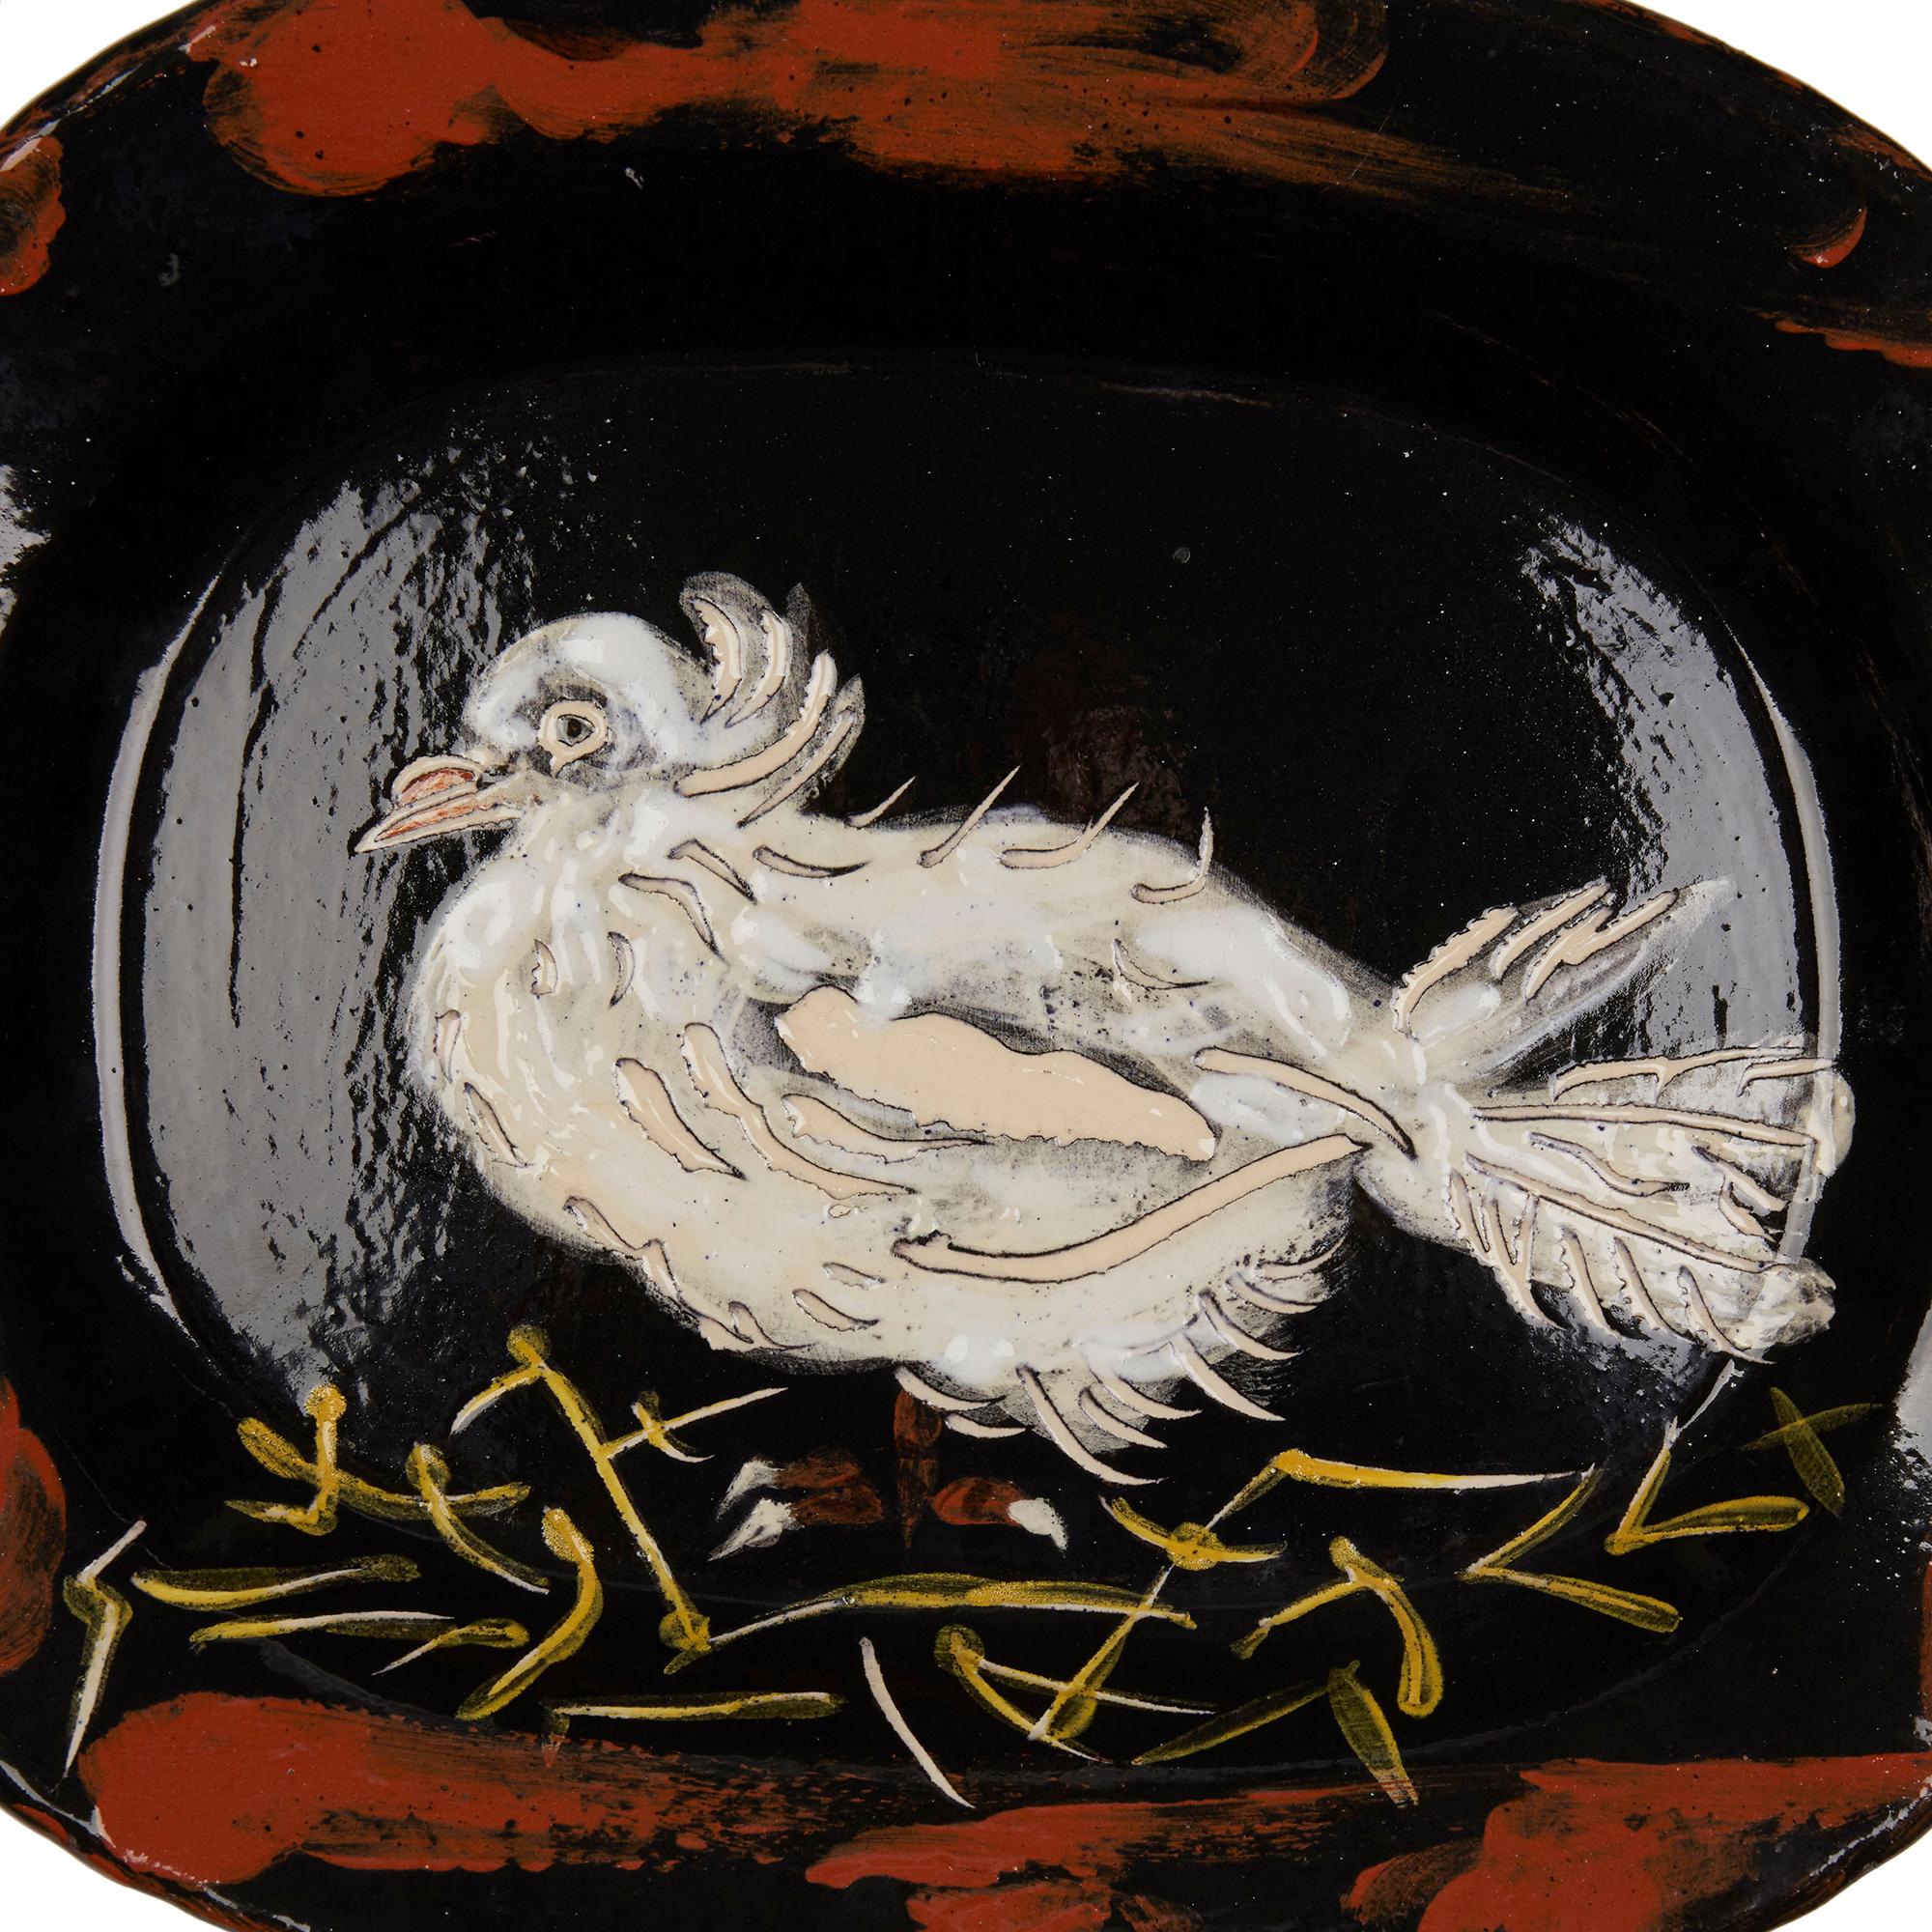 Colombe sur lit de Paille (dove on bed of straw) and incised 'Madoura Plein Feu/Edition Picasso'

This white rounded rectangular earthenware dish is decorated with a dove, of slightly disheveled appearance, on a straw bed in red, yellow and white